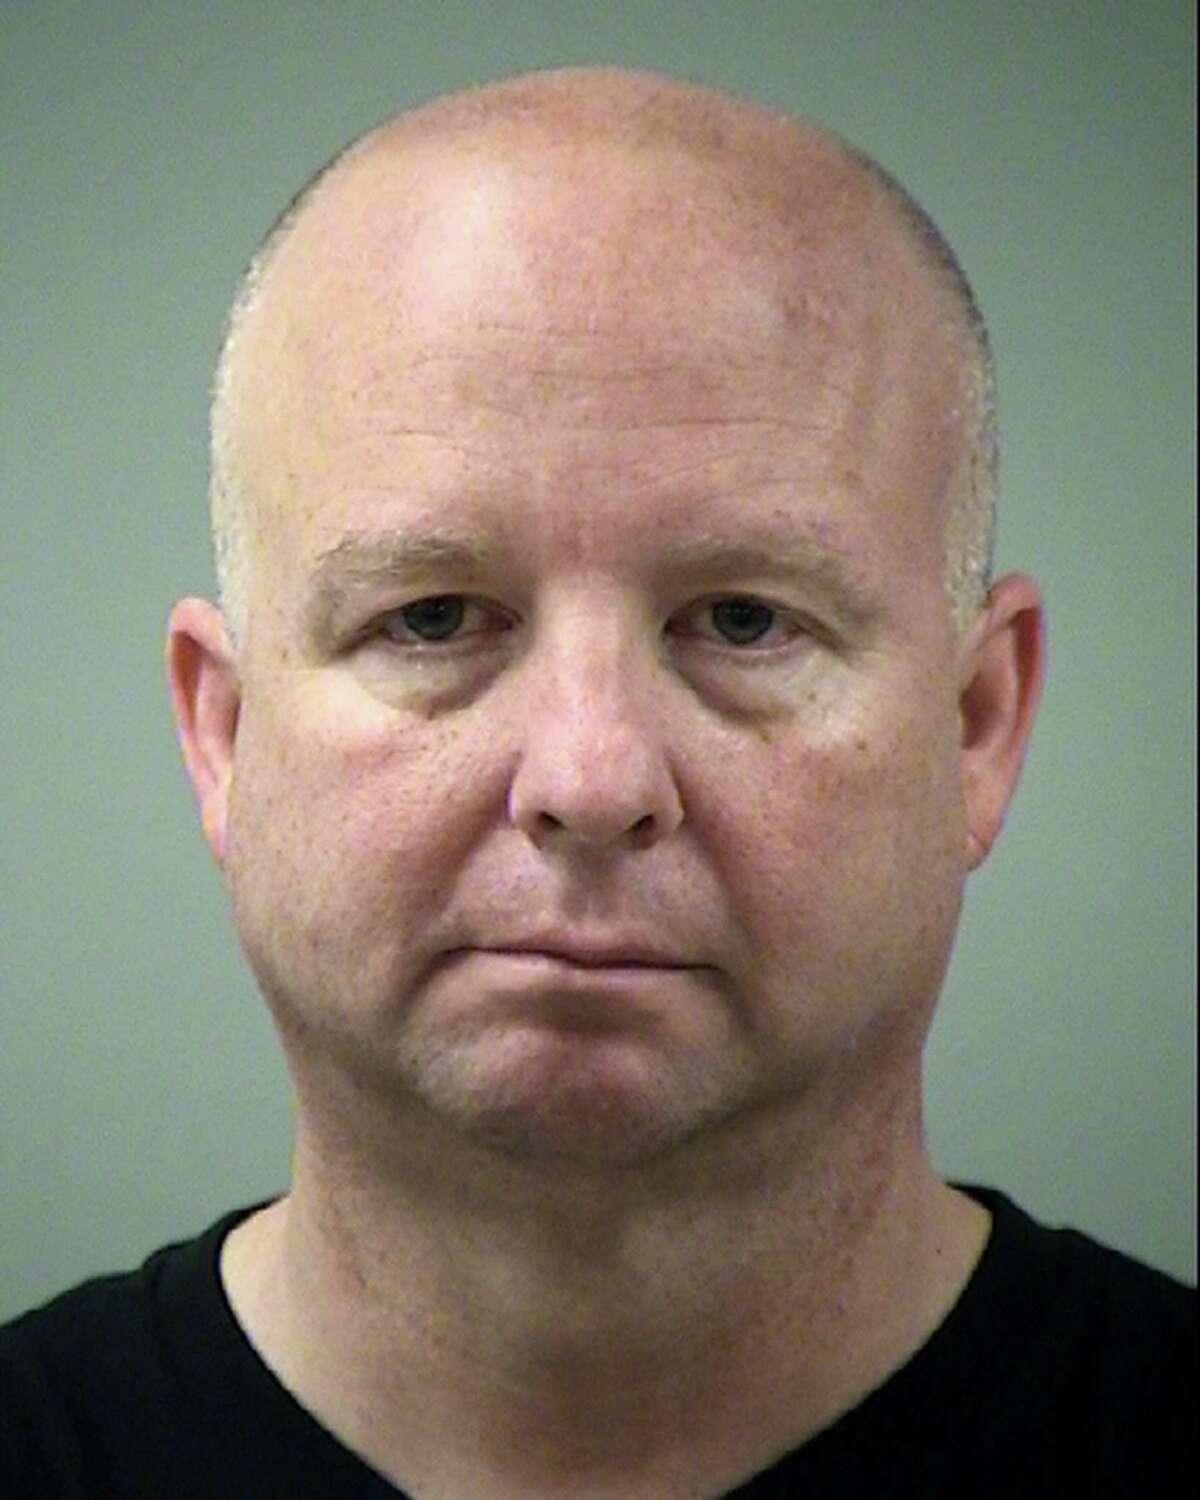 Bexar County Precinct 3 Commissioner Kevin Wolff, seen in a Sunday , July 31, 2016 booking mug provided by the Bexar County Sheriff's office, was arrested and charged with Driving While Intoxicated at 3 a.m. Sunday after allegedly running into two vehicles at a Whataburger in the 1000 block of San Pedro Avenue.